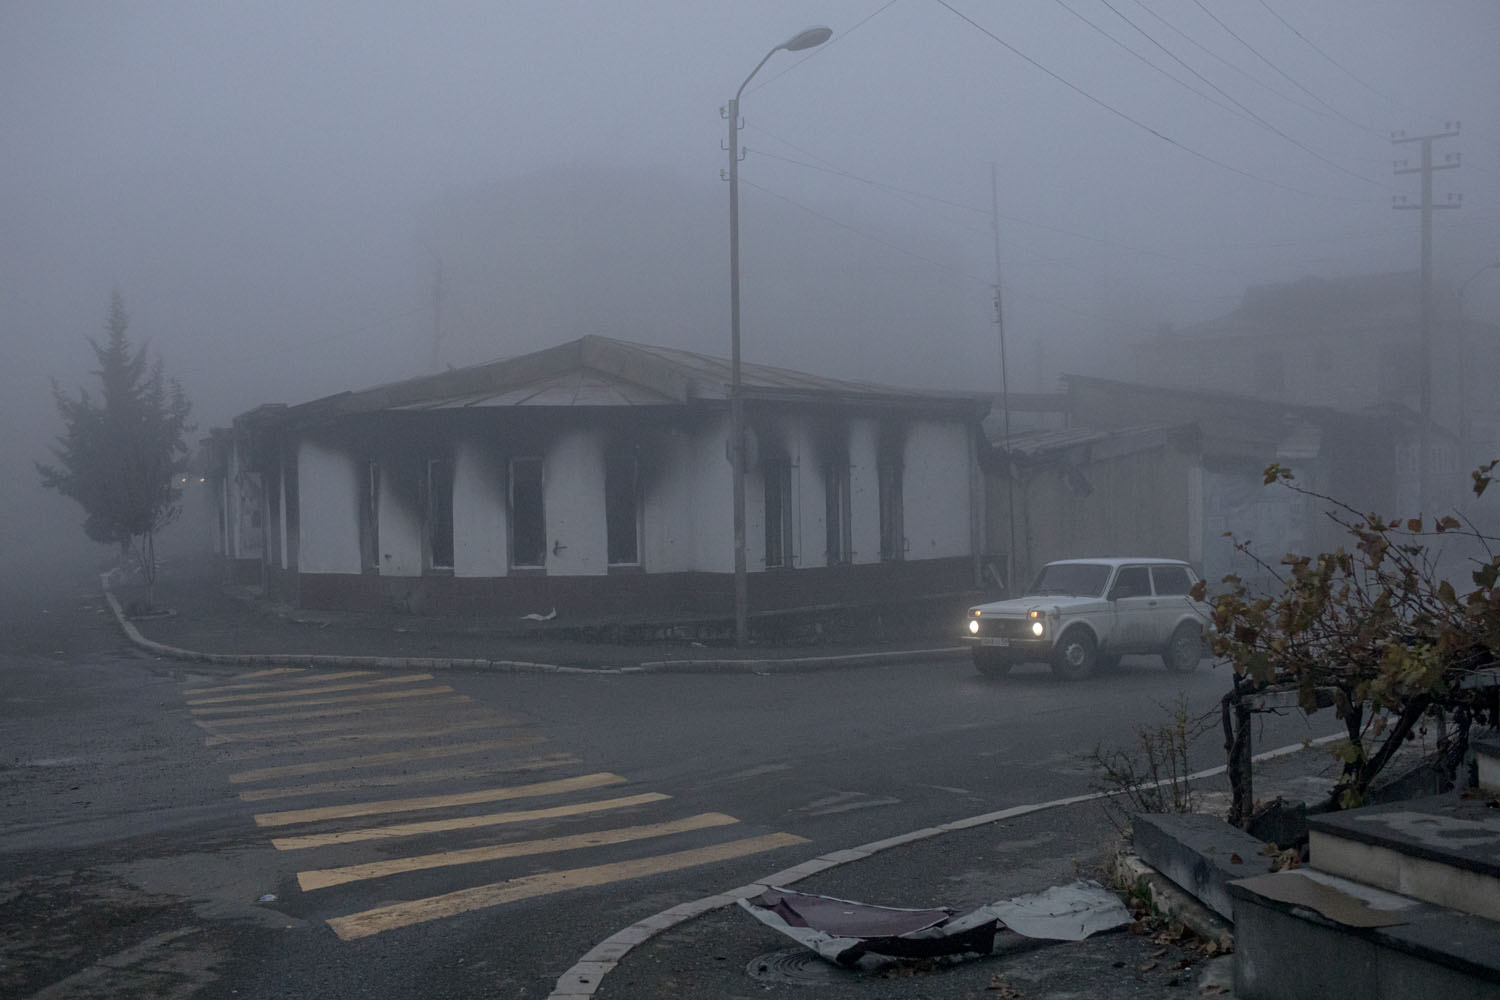 When I visited Stepanakert last November, we drove around the city, often not knowing where we were going because of the heavy fog.